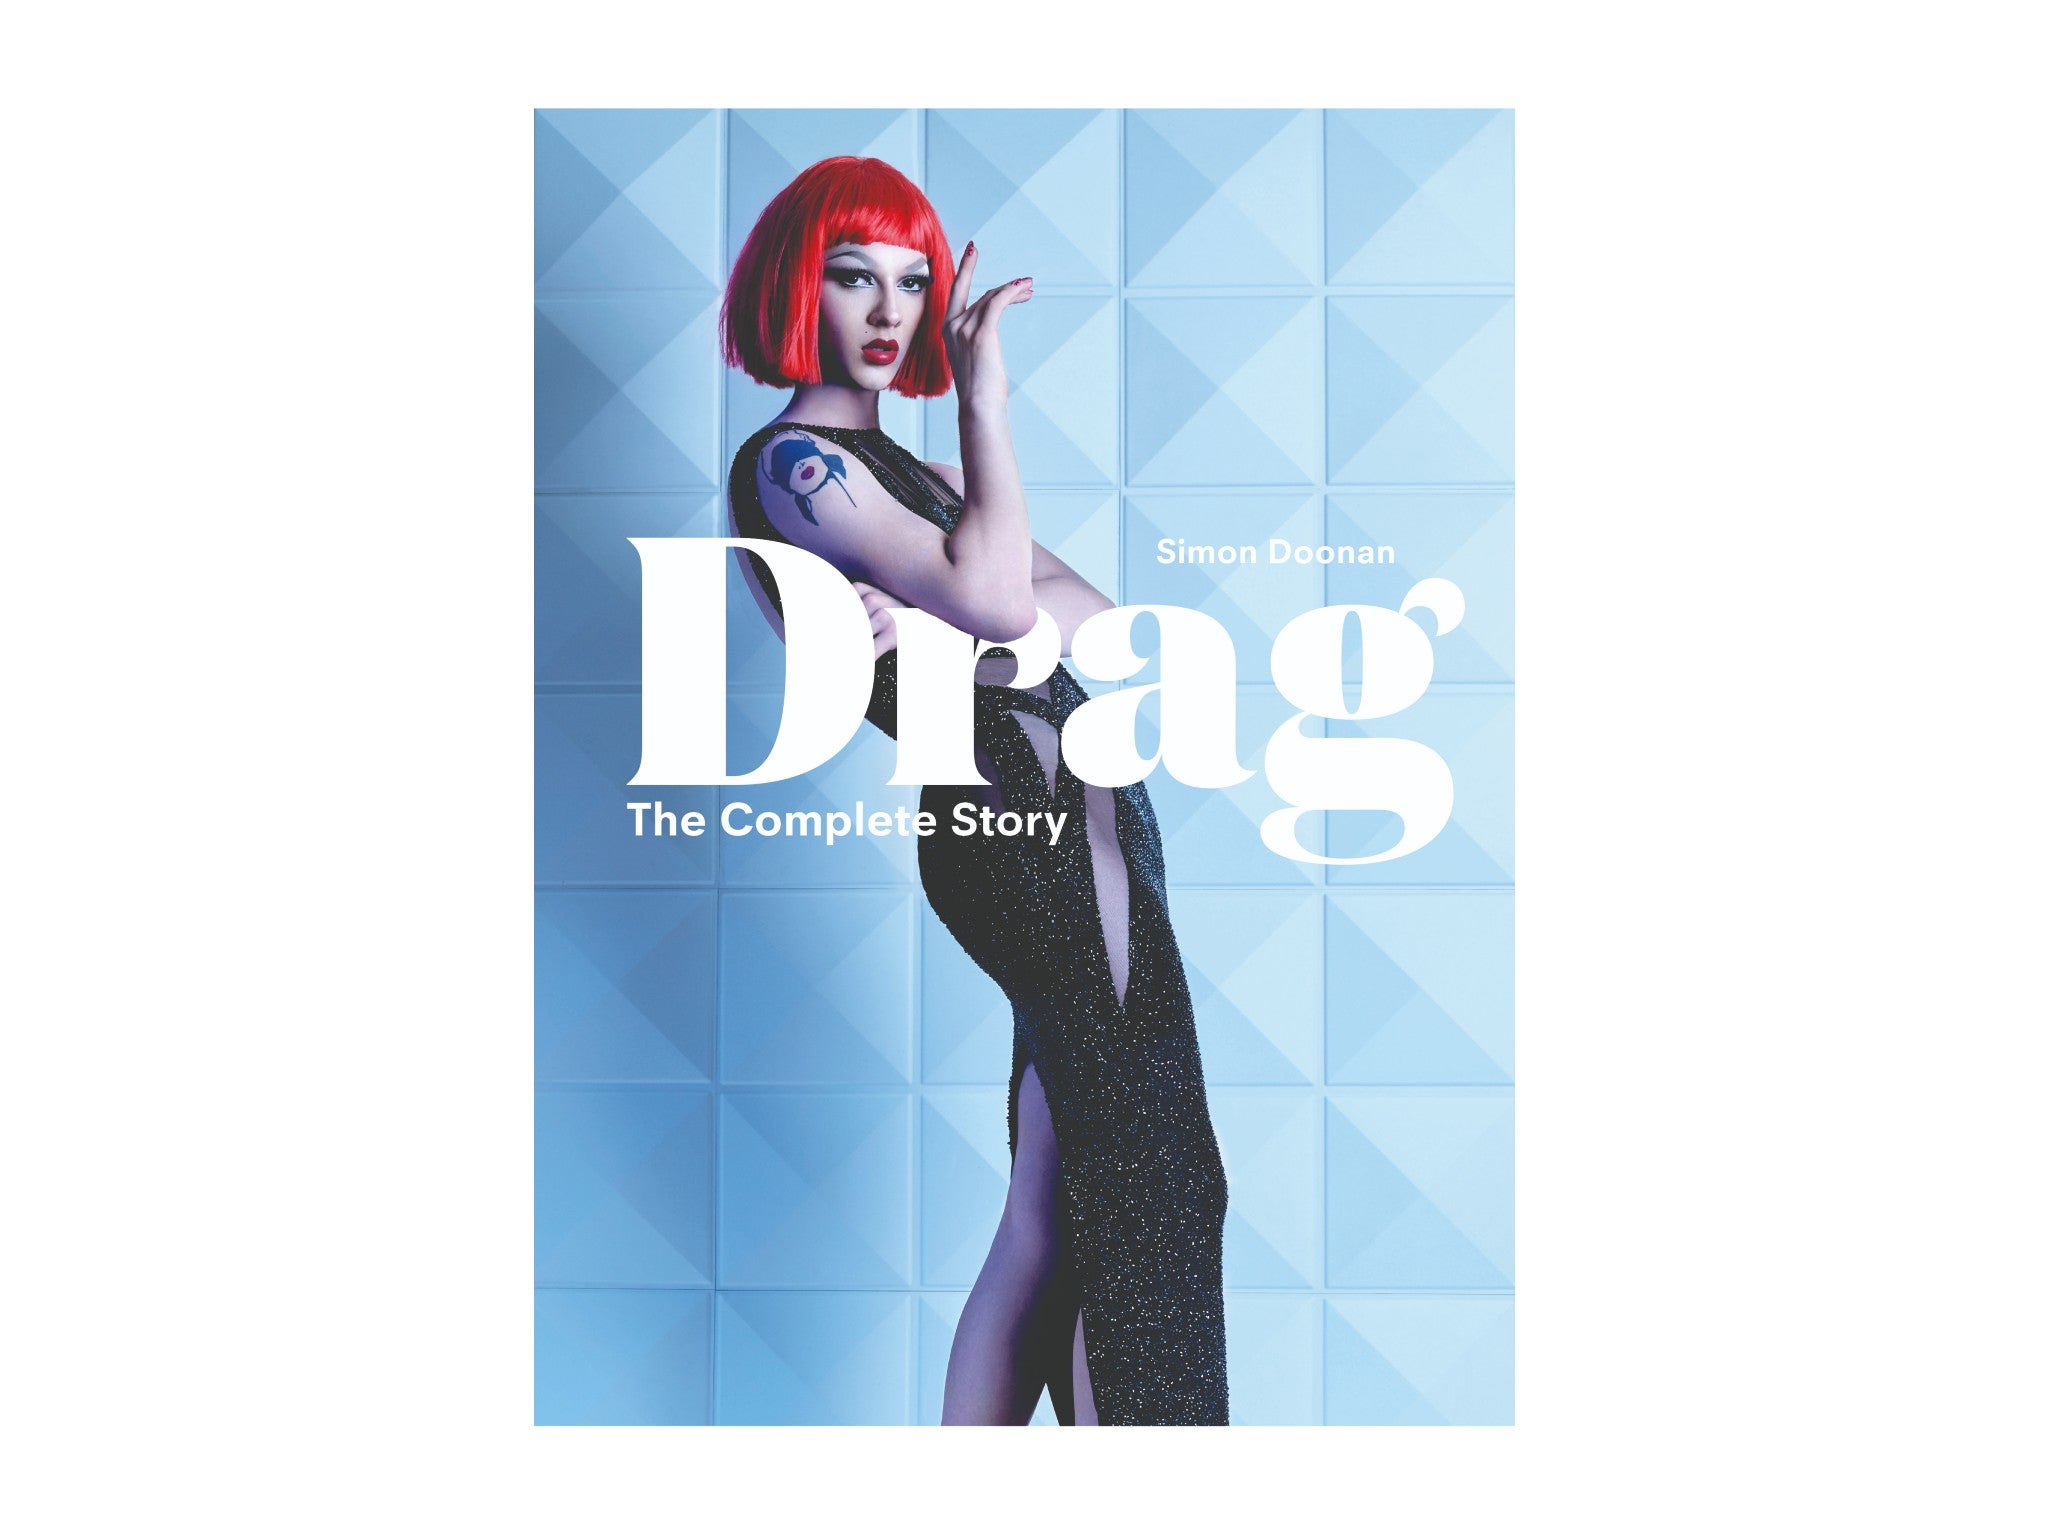 ‘Drag- The Complete Story’ by Simon Doonan indybest.jpg